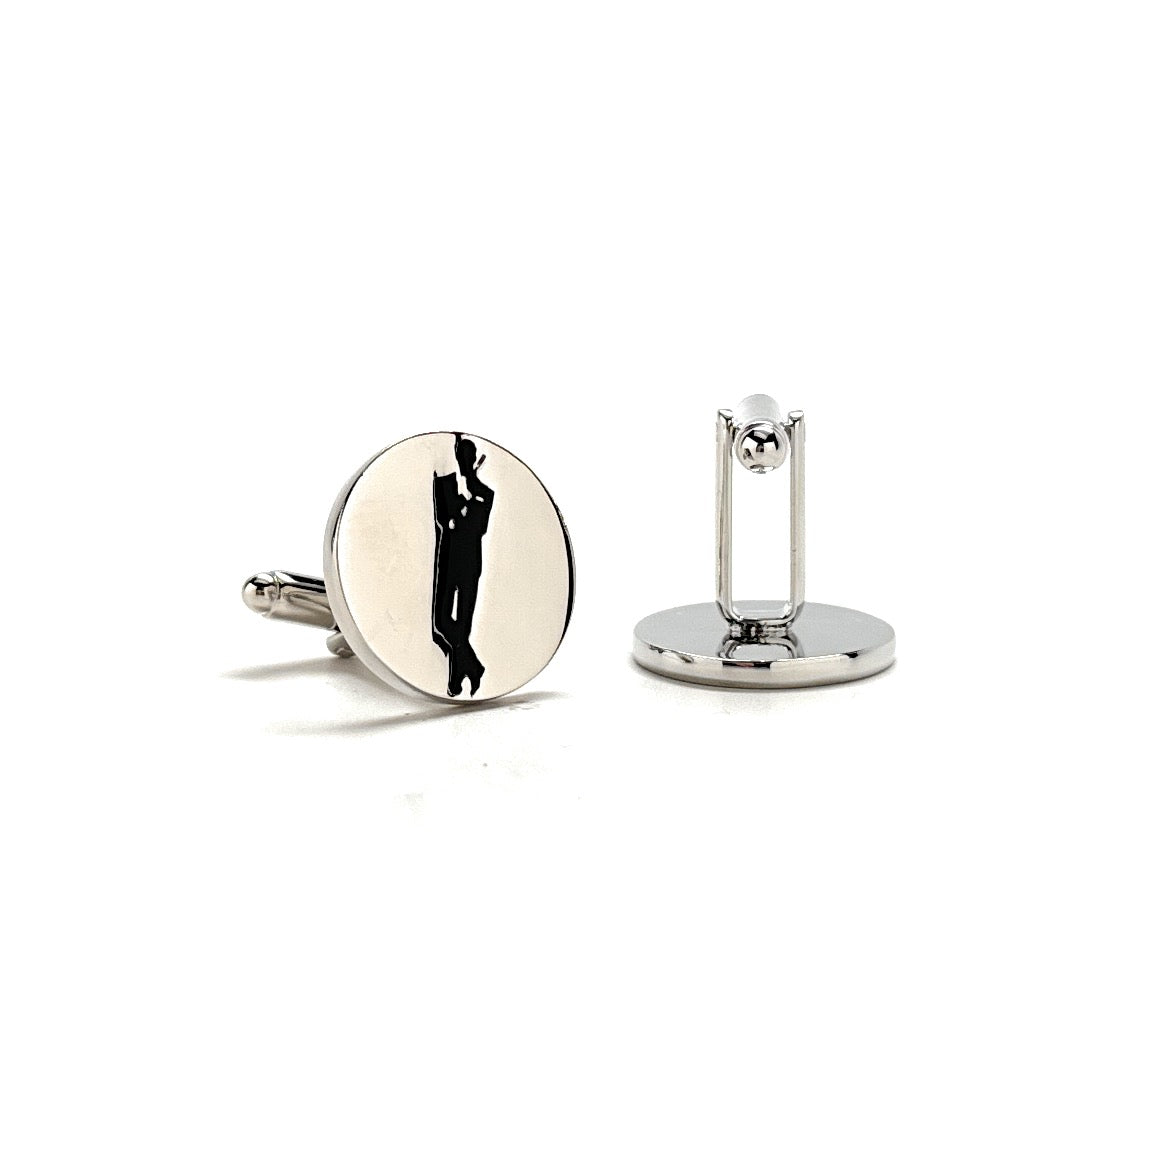 James Bond Cufflinks Famous Movie Poster Pose Cuff Links Super Spy Collection Royal Silver Platted Black Enamel Emboss Design with Gift Box